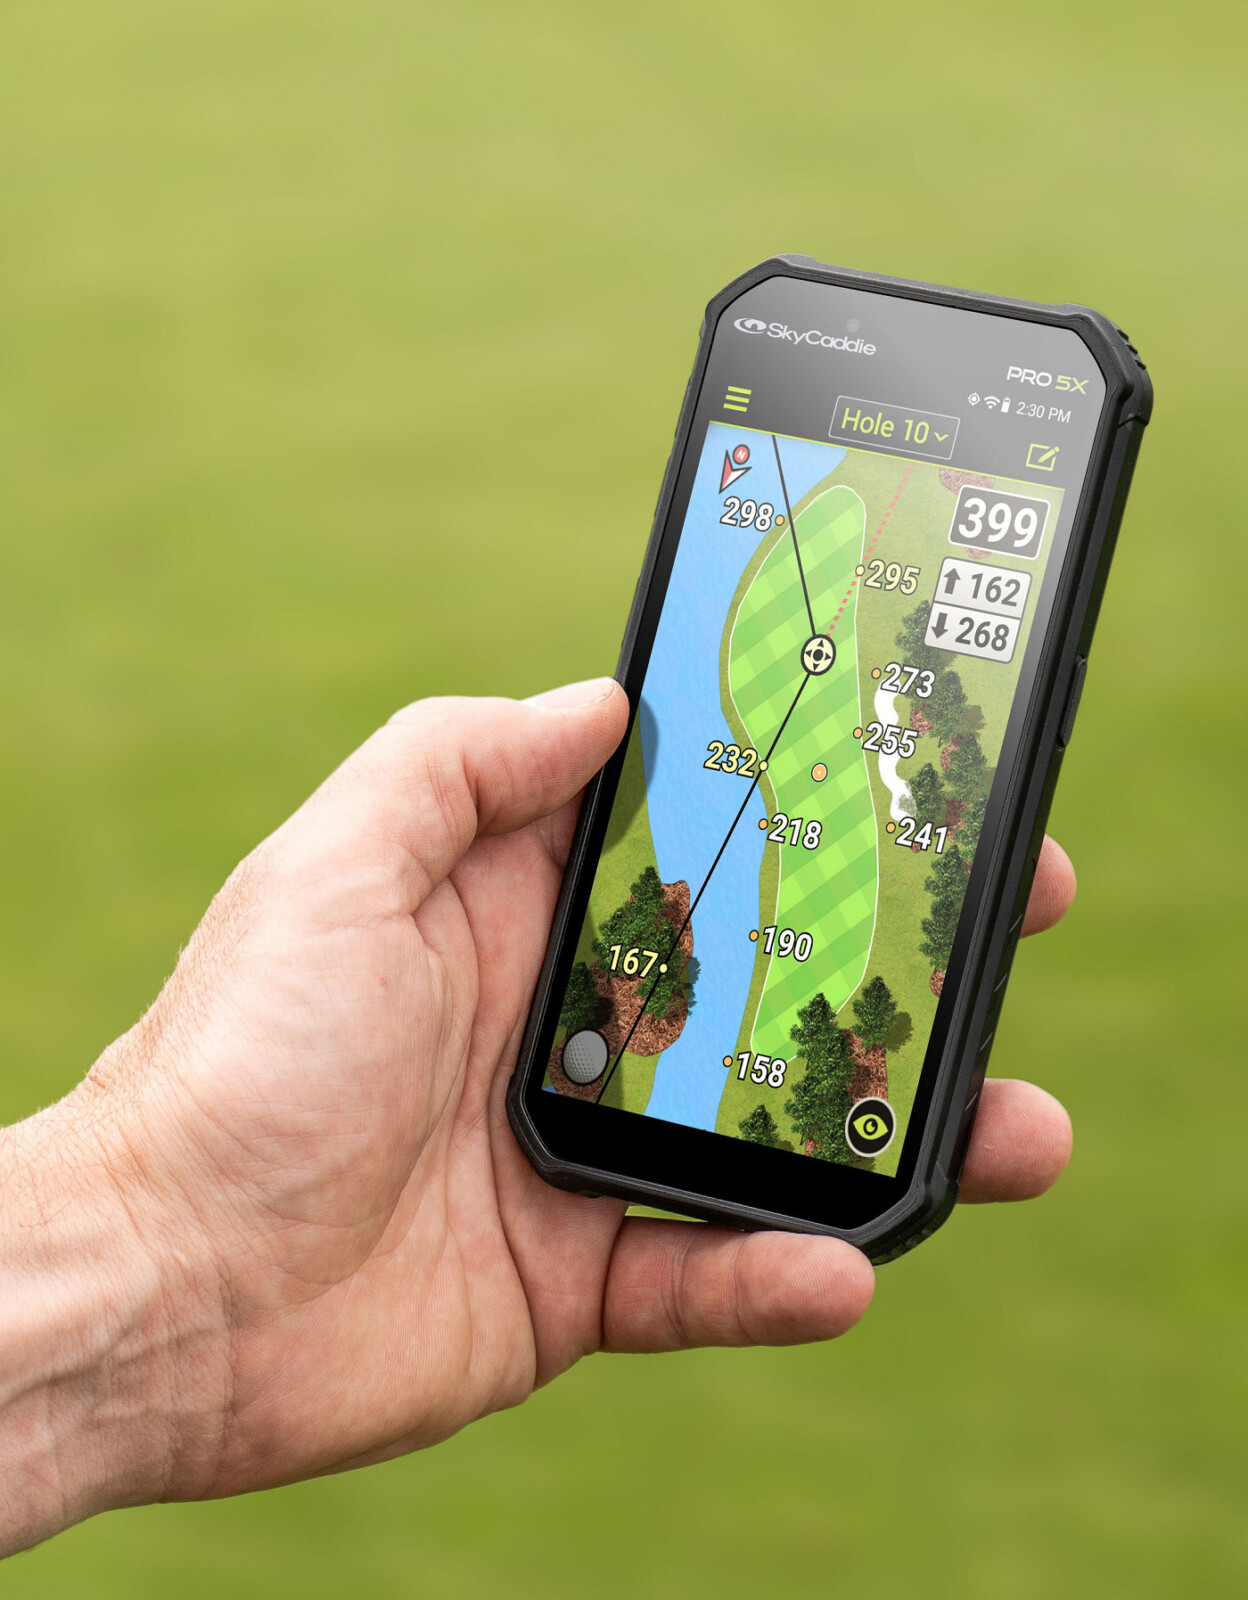 Baker scores first win for new SkyCaddie PRO 5X